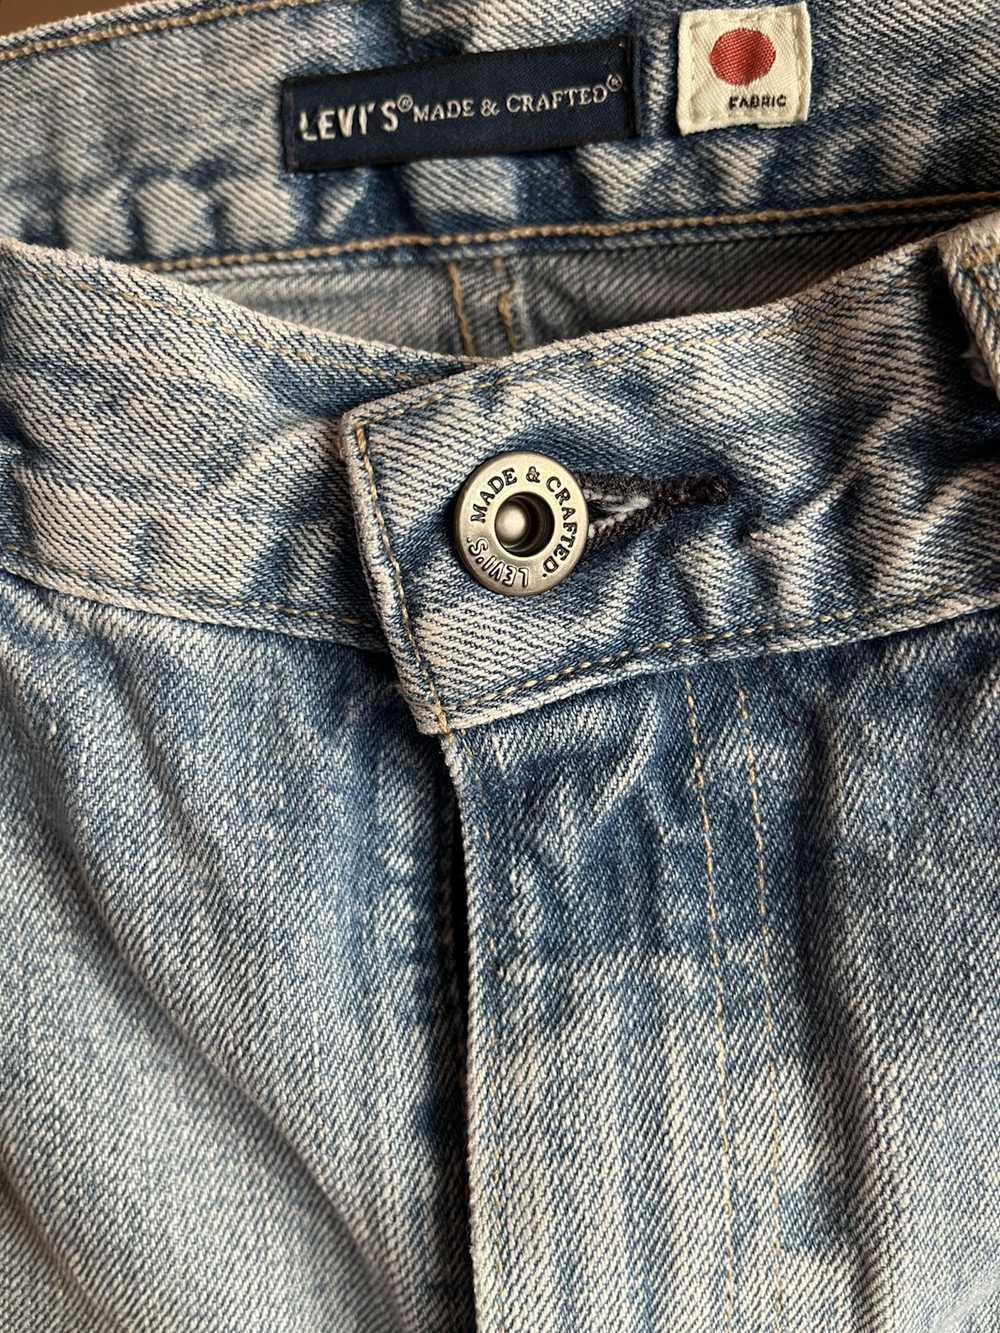 Levi's Made & Crafted Vintage Levi’s Made & Craft… - image 4